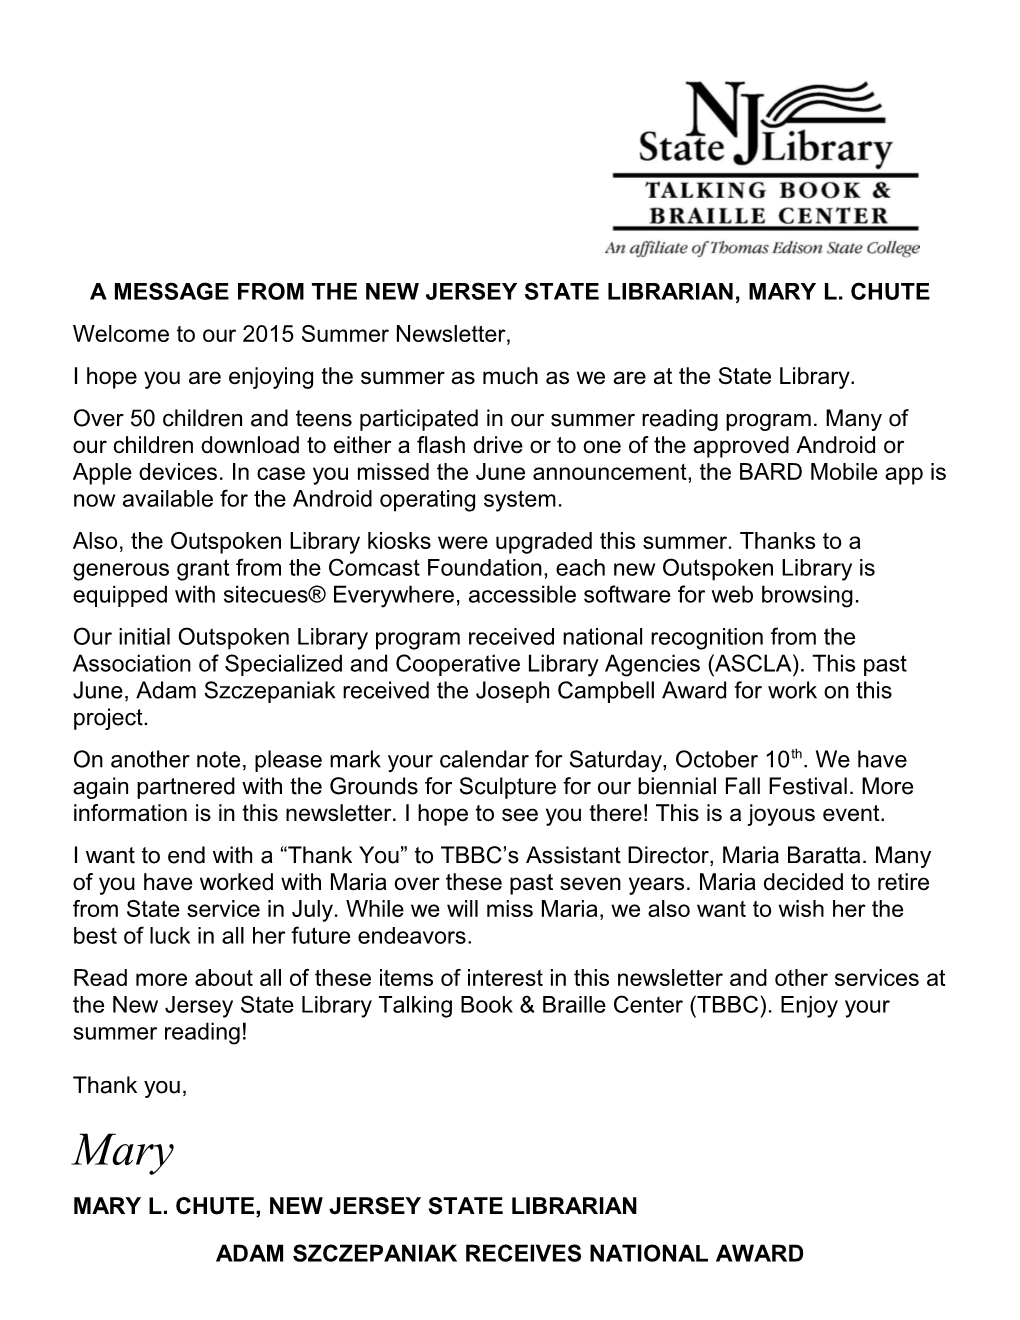 A Message from the New Jersey State Librarian, Mary L. Chute